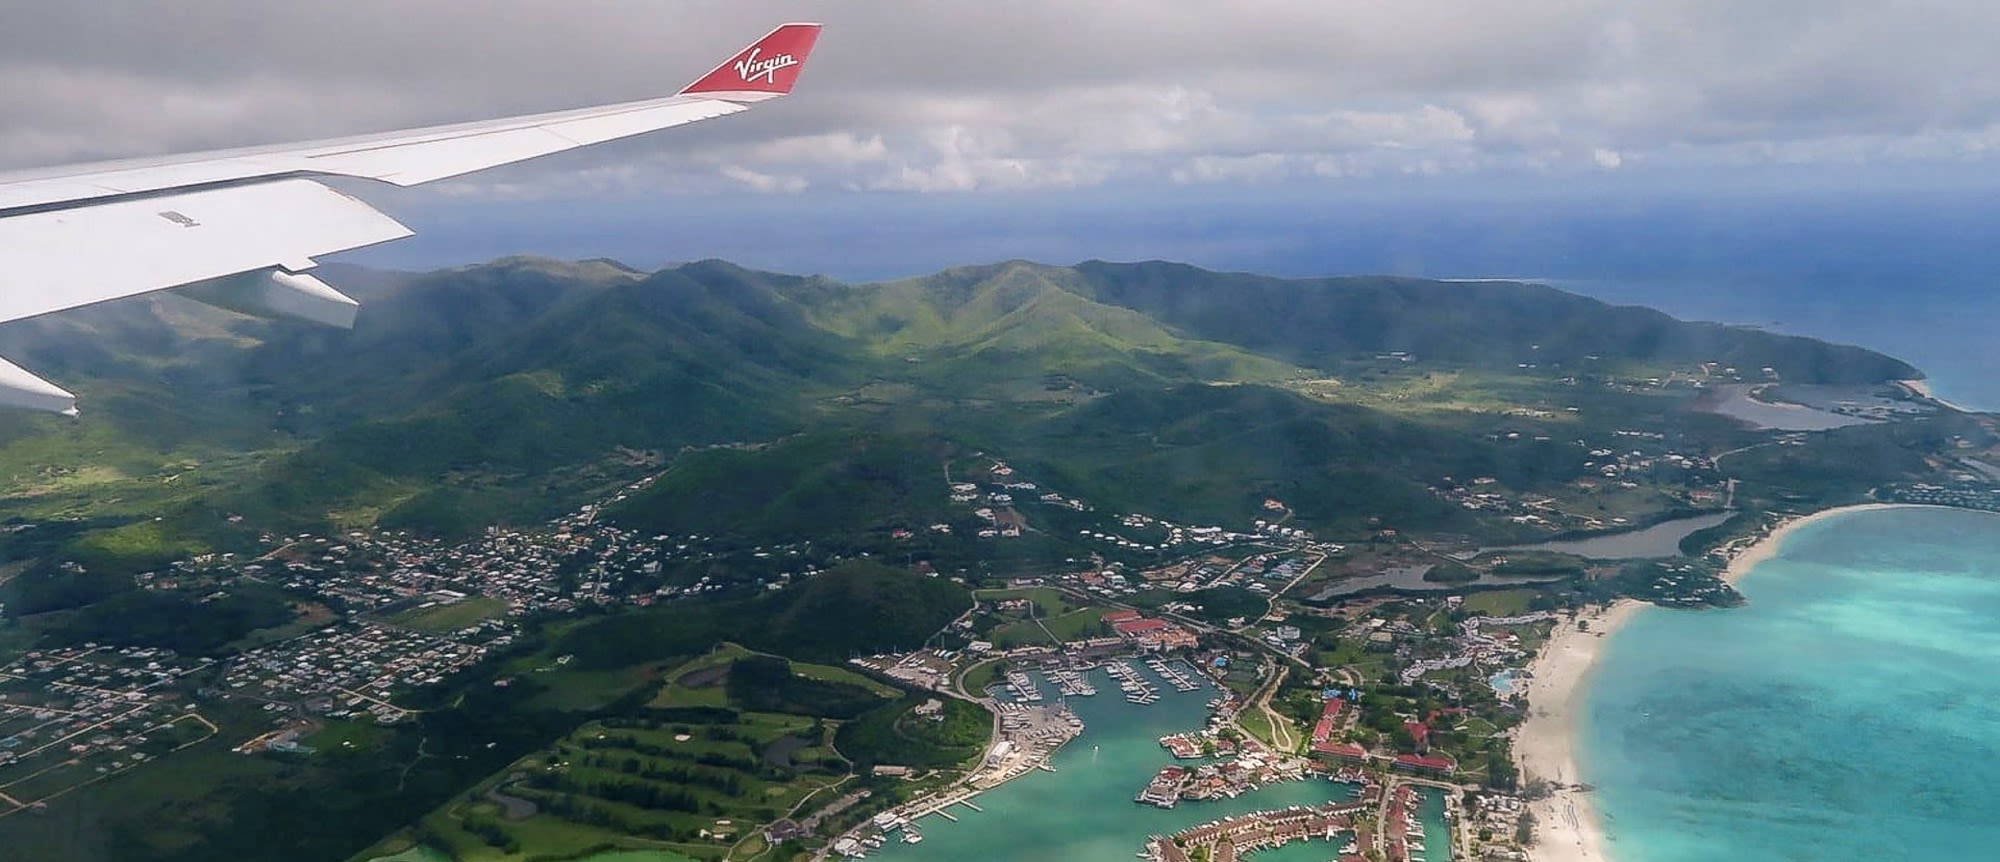 The wing of a Virgin Atlantic aircraft on approach to Antigua